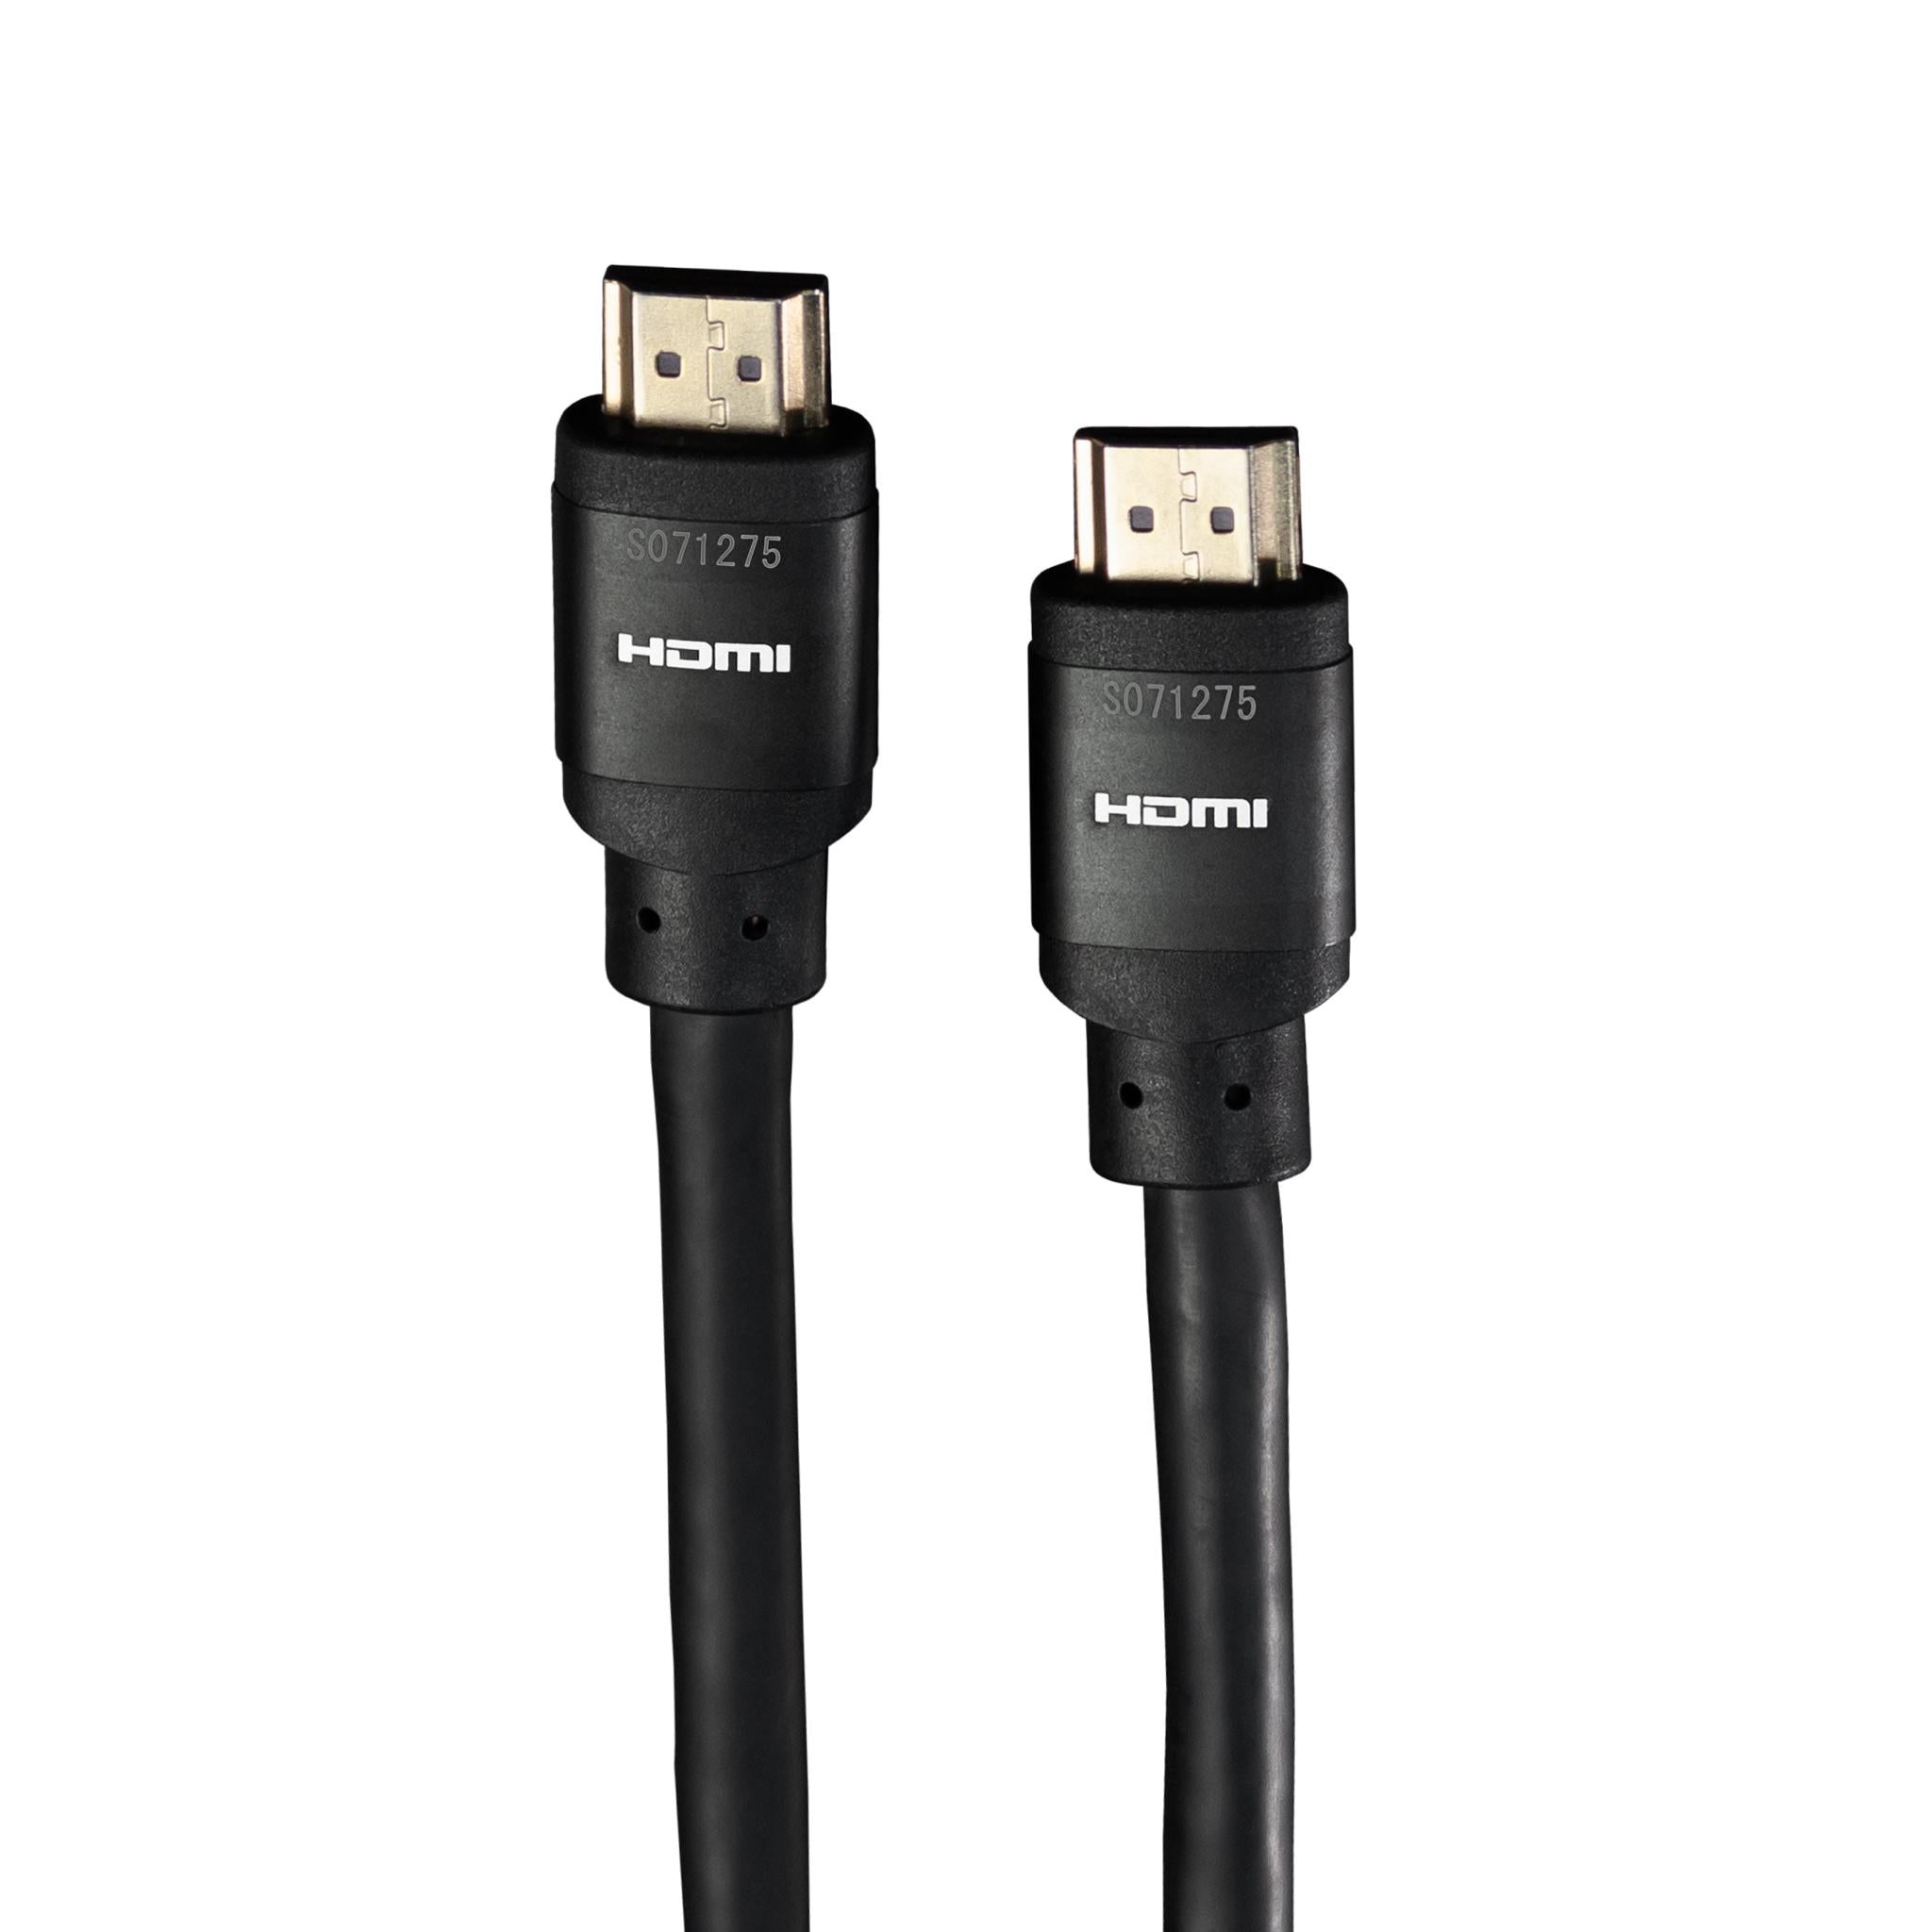 Bullet Train 48Gbps HDMI Cable - AVStore